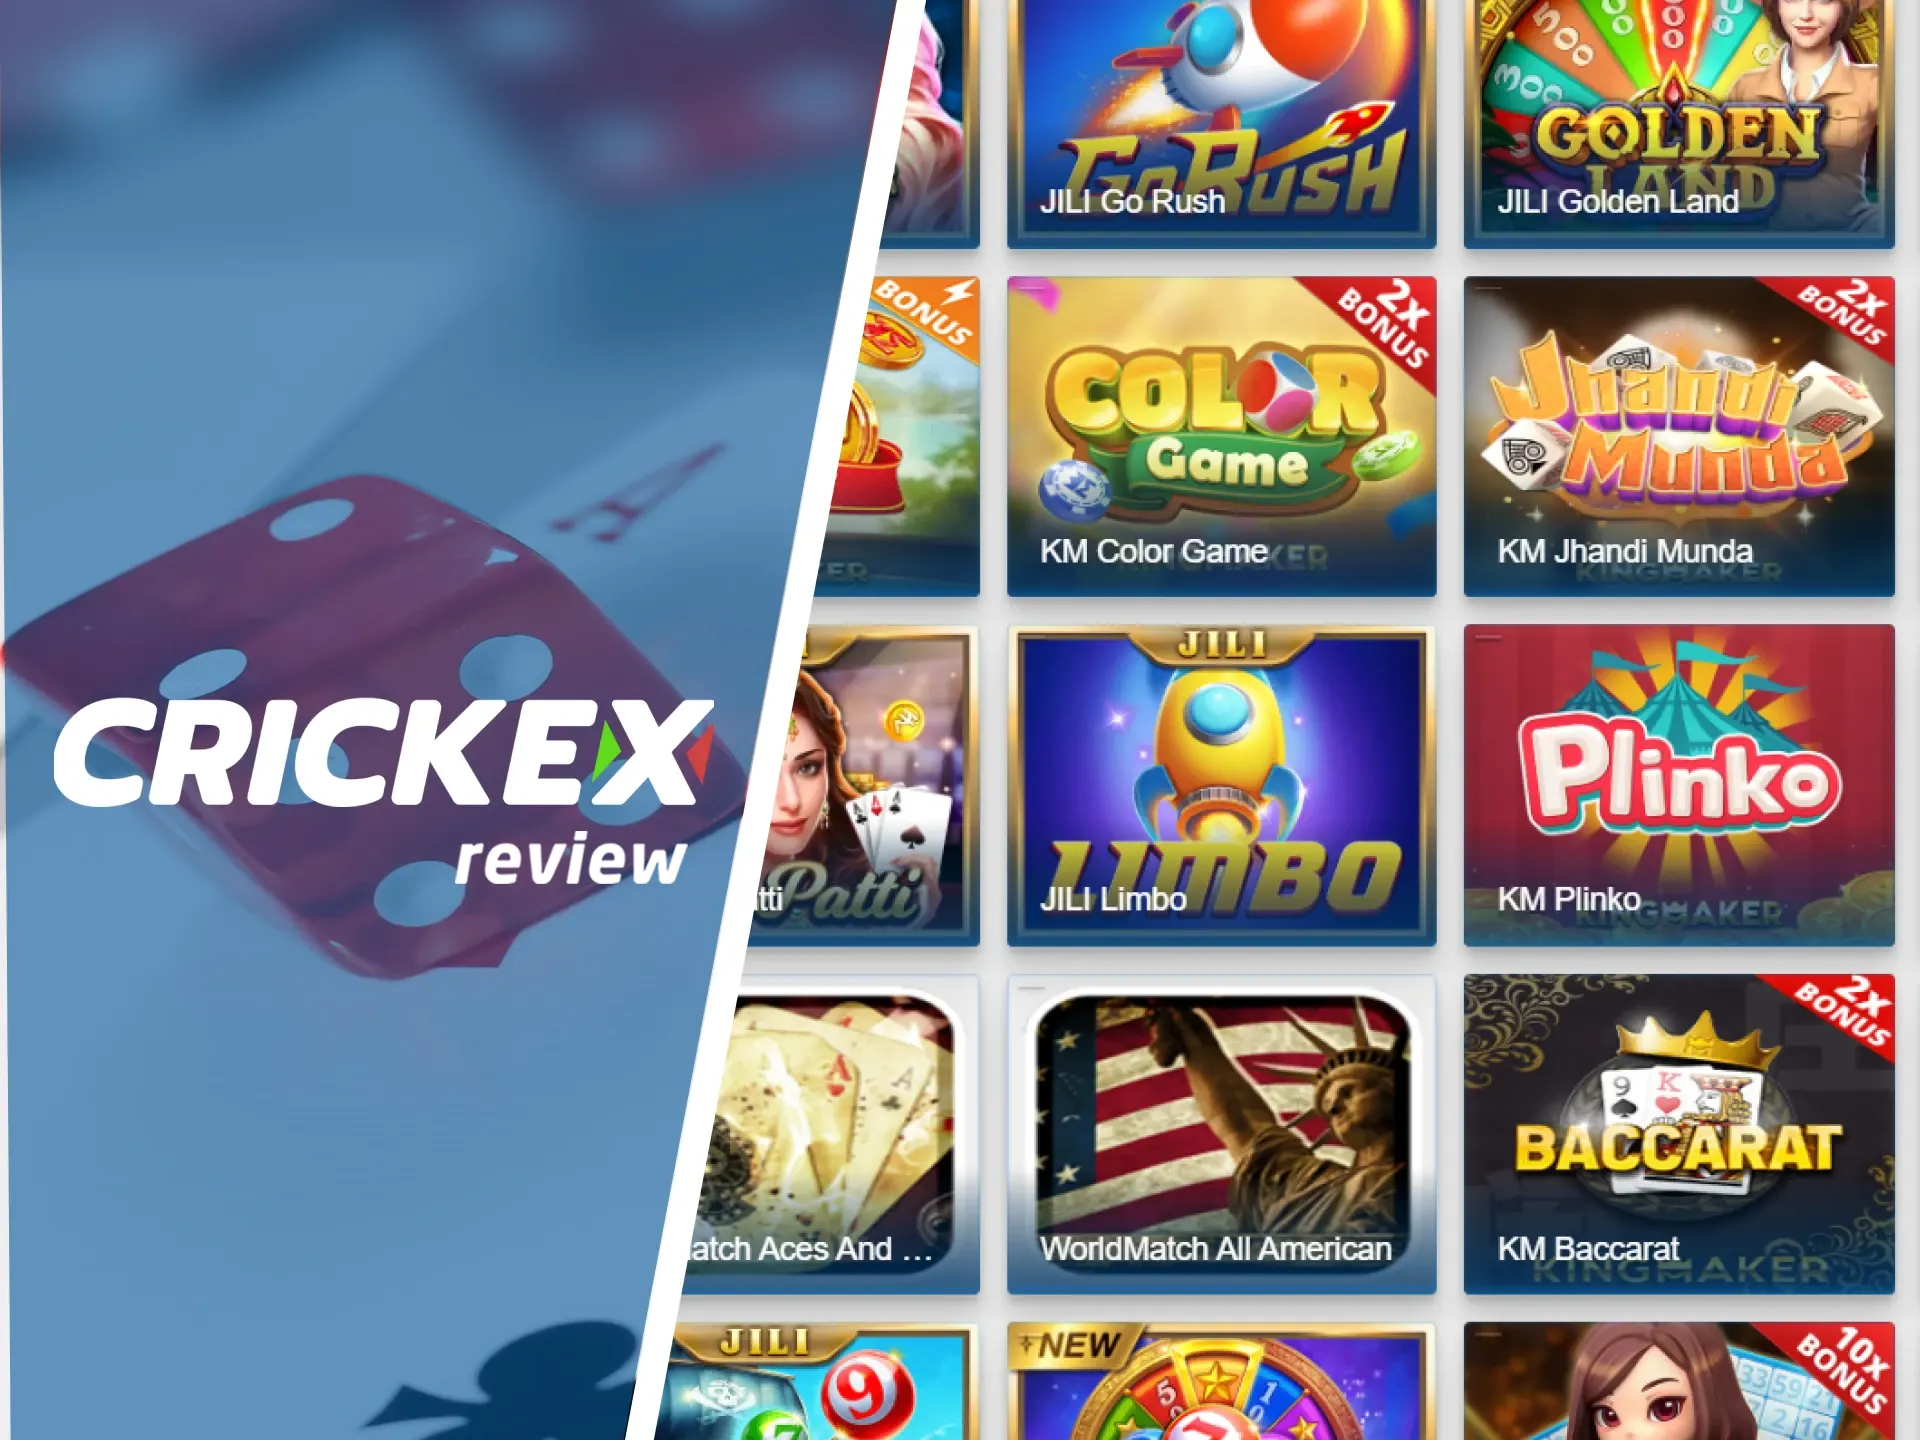 There are games in Table Games on Crickex in the Live Casino section.